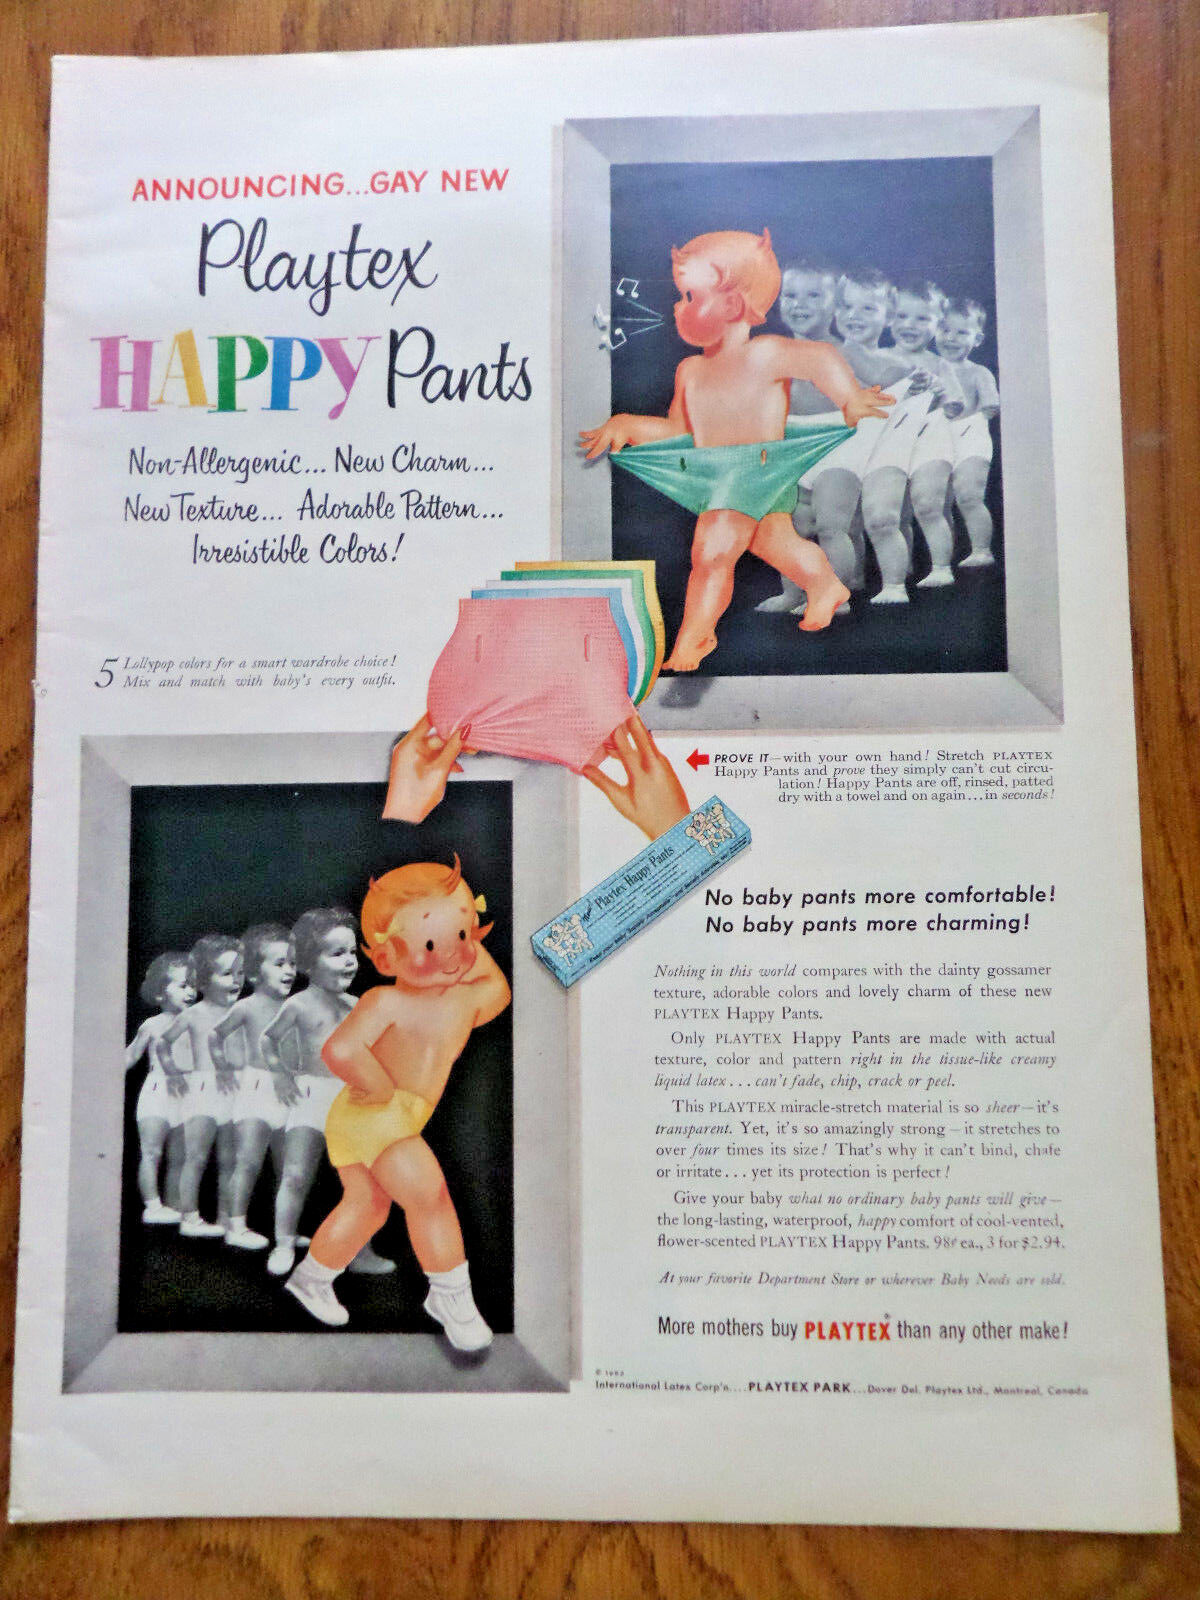 1953 F. W. Woolworth's Co Ad Array of Toiletries 1953 Playtex Hapy Pants Ad